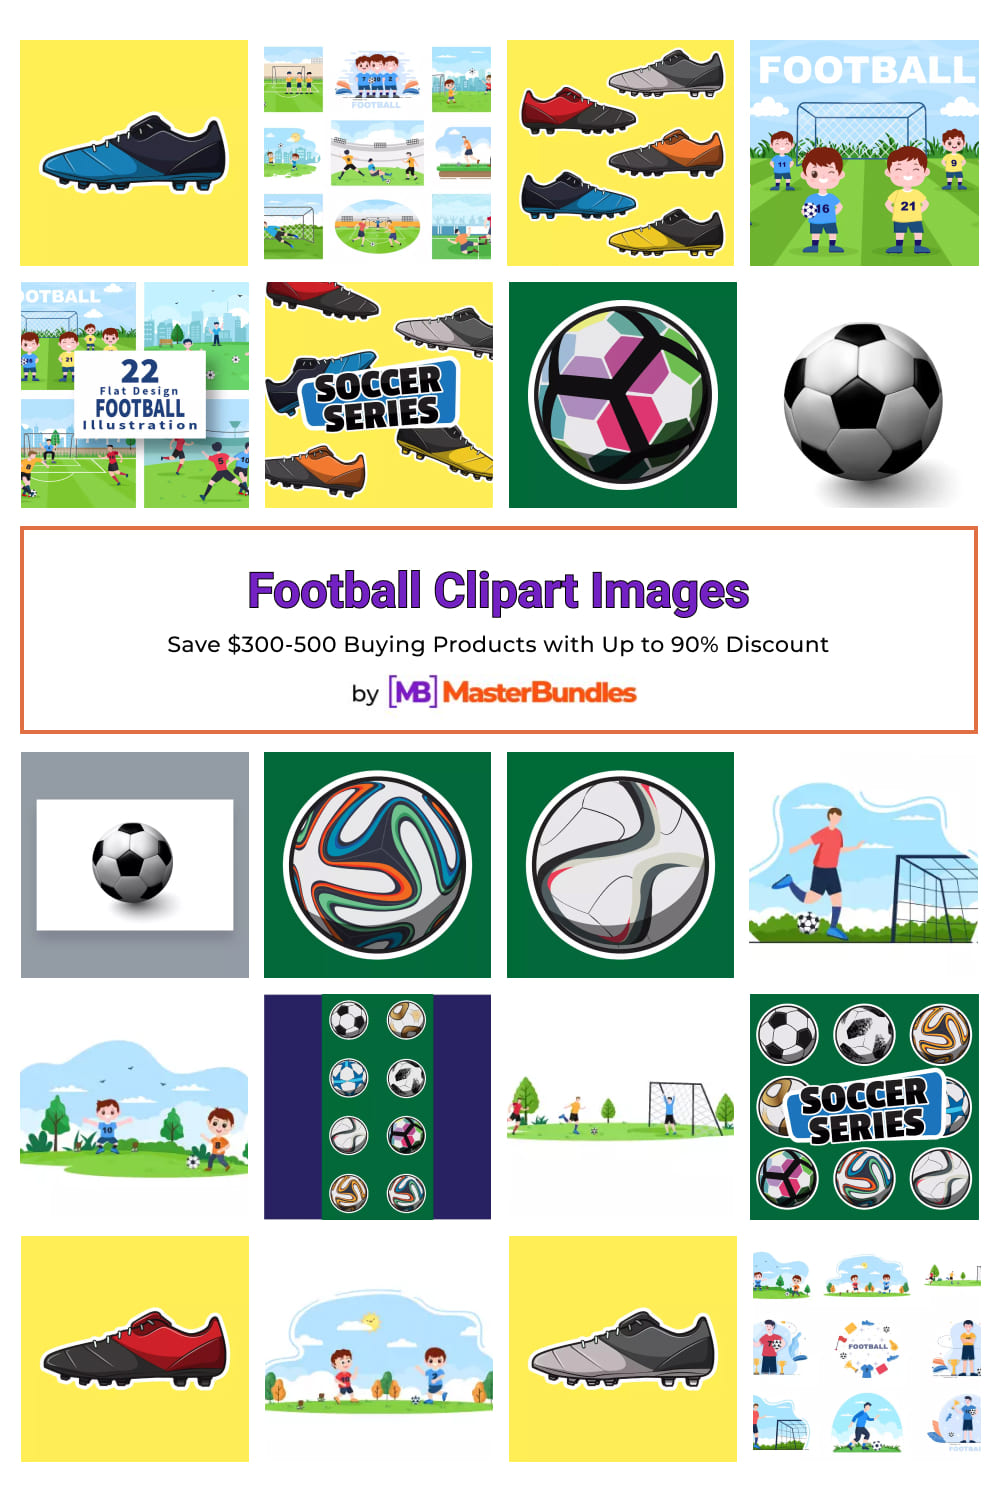 Football Clipart Images Pinterest image.